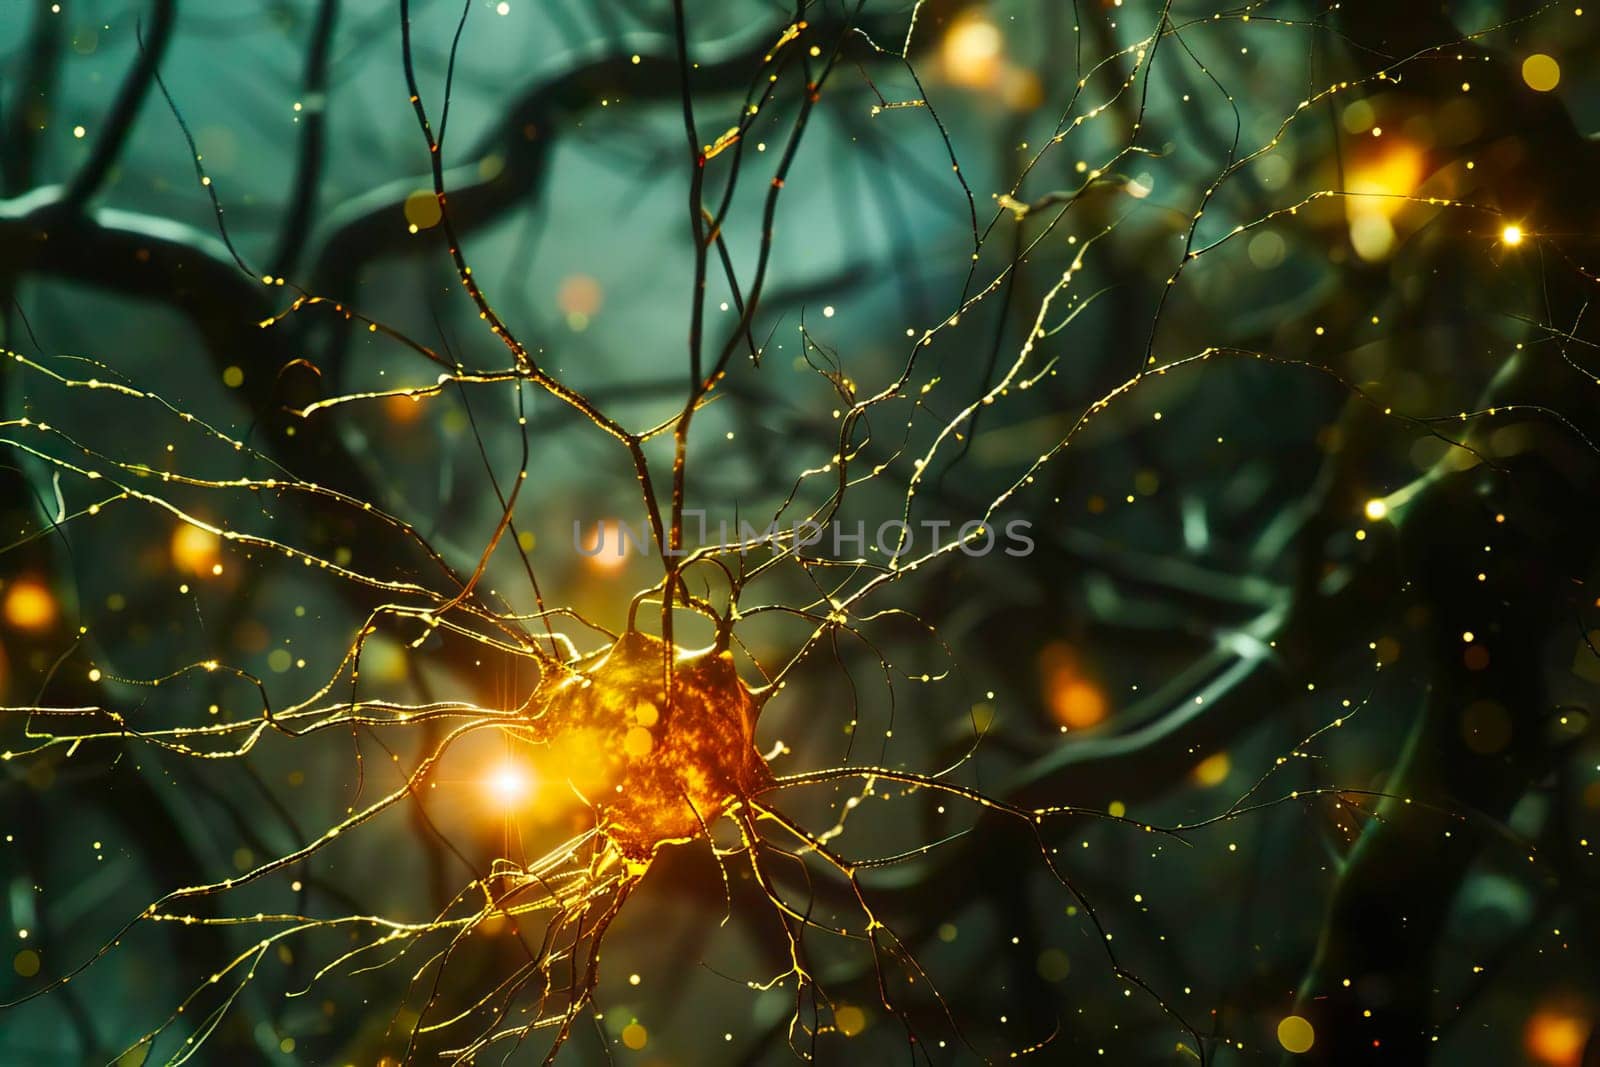 A network of neurons with synapses brightly firing, illustrating brain activity.